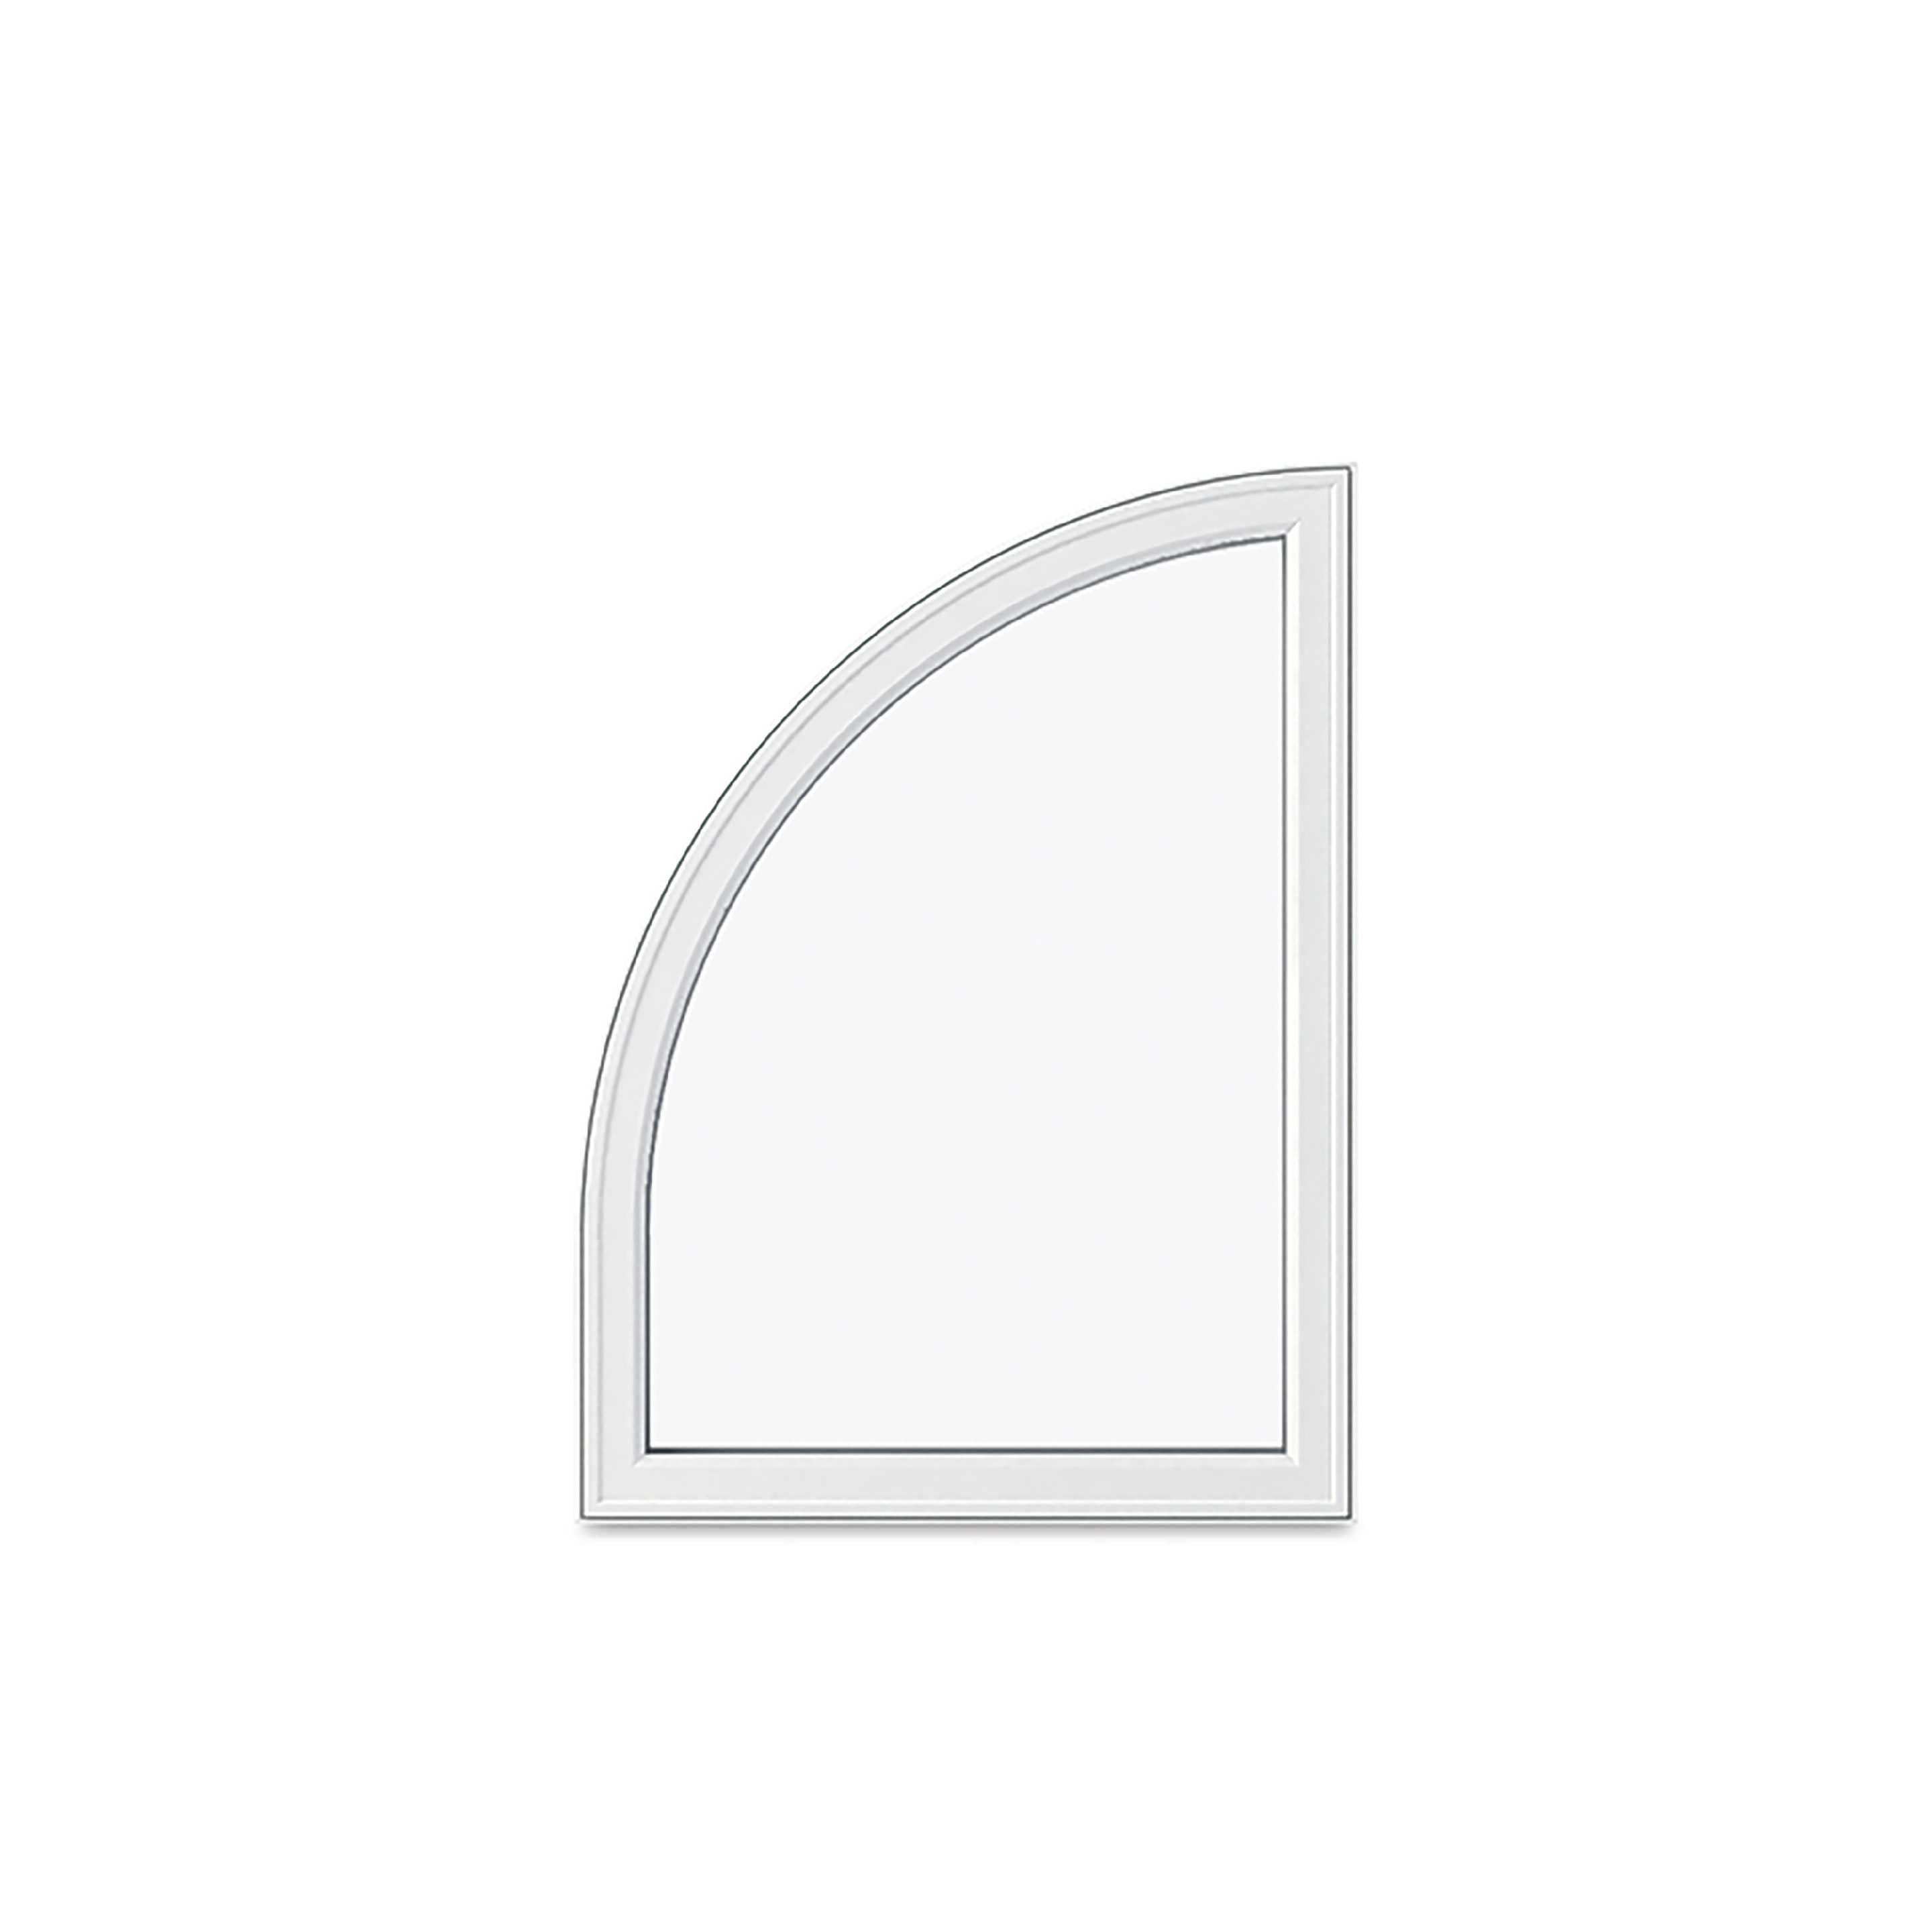 Marvin Replacement Quarter Round Window